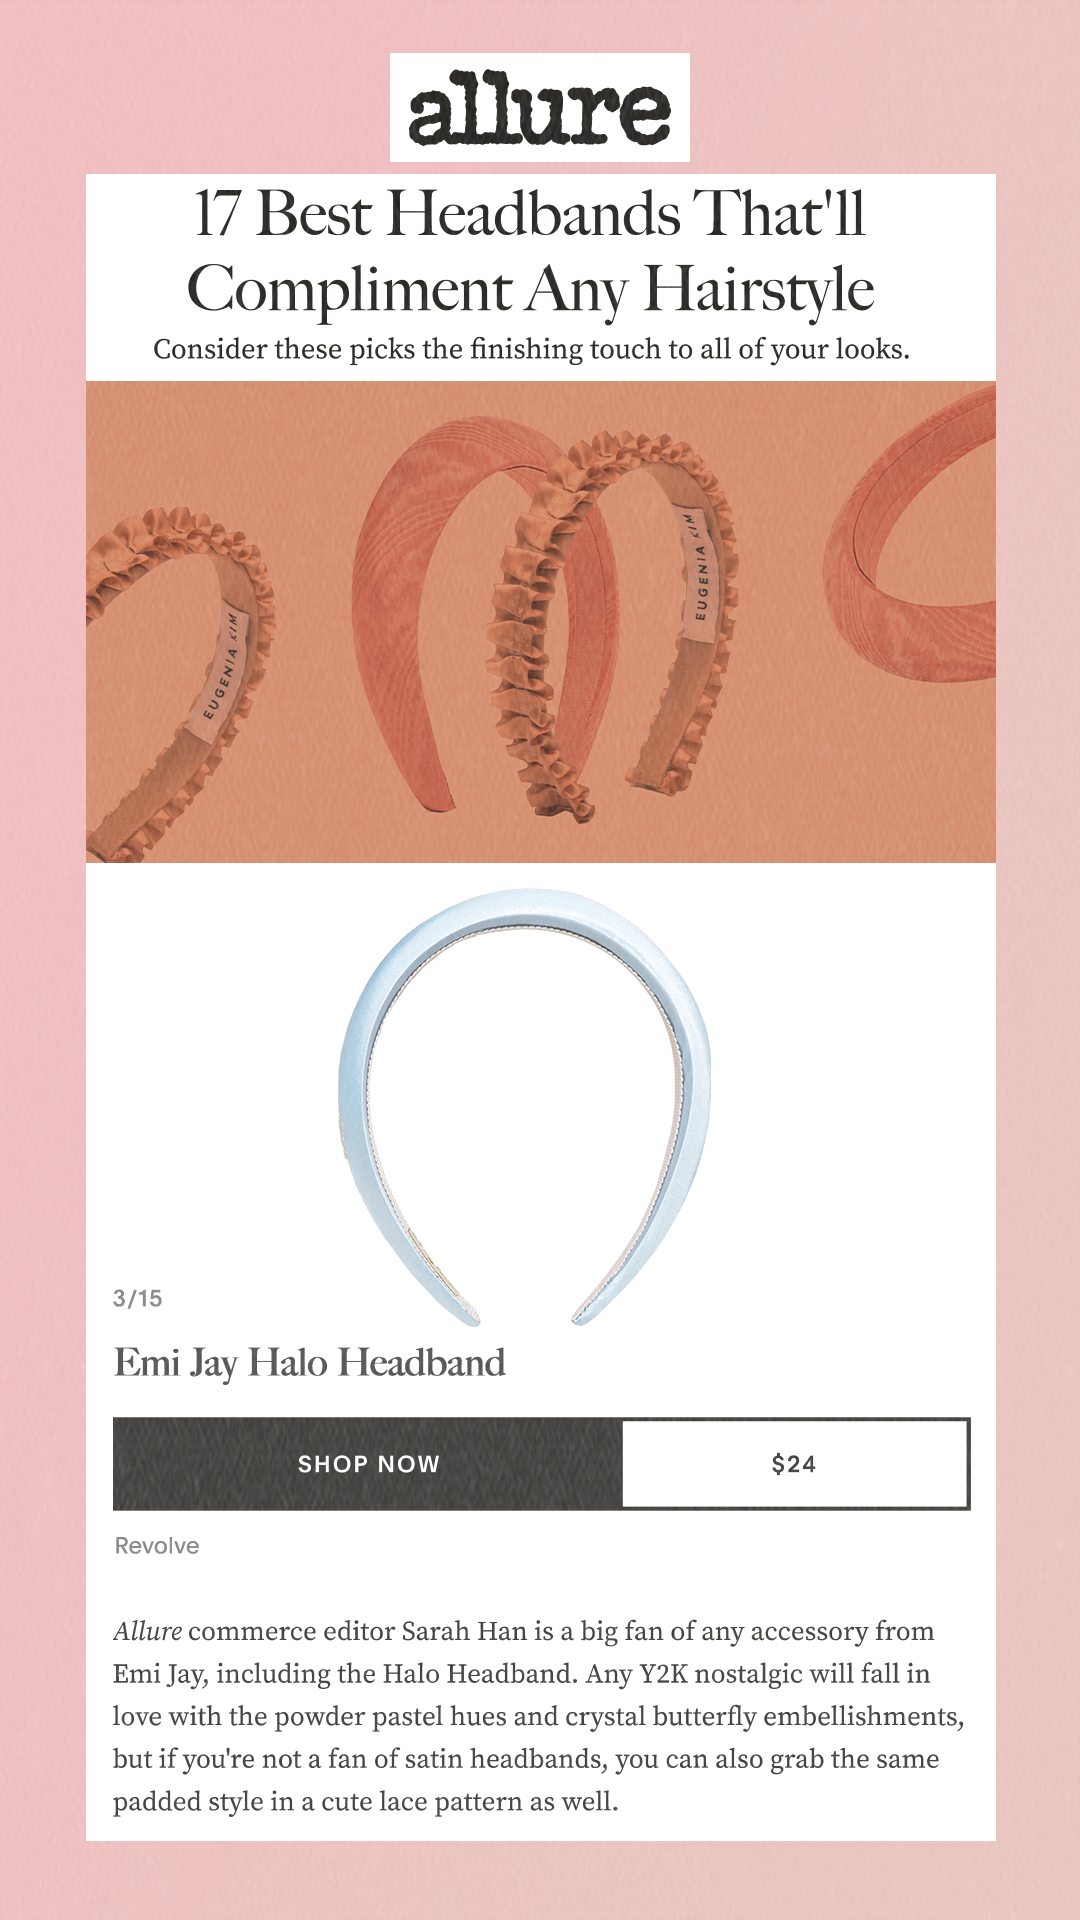 17 Best Headbands That'll Compliment Any Hairstyle Consider these picks the finishing touch to all of your looks. 3/15 Emi Jay Halo Headband Shop Now $24 Allure commerce editor Sarah Han is a big fan of any accessory from Emi Jay, including the Halo Headband. Any Y2K nostalgic will fall in love with the powder pastel hues and crystal butterfly embellishments, but if you're not a fan of satin headbands, you can also grab the same padded style in a cute lace pattern as well.